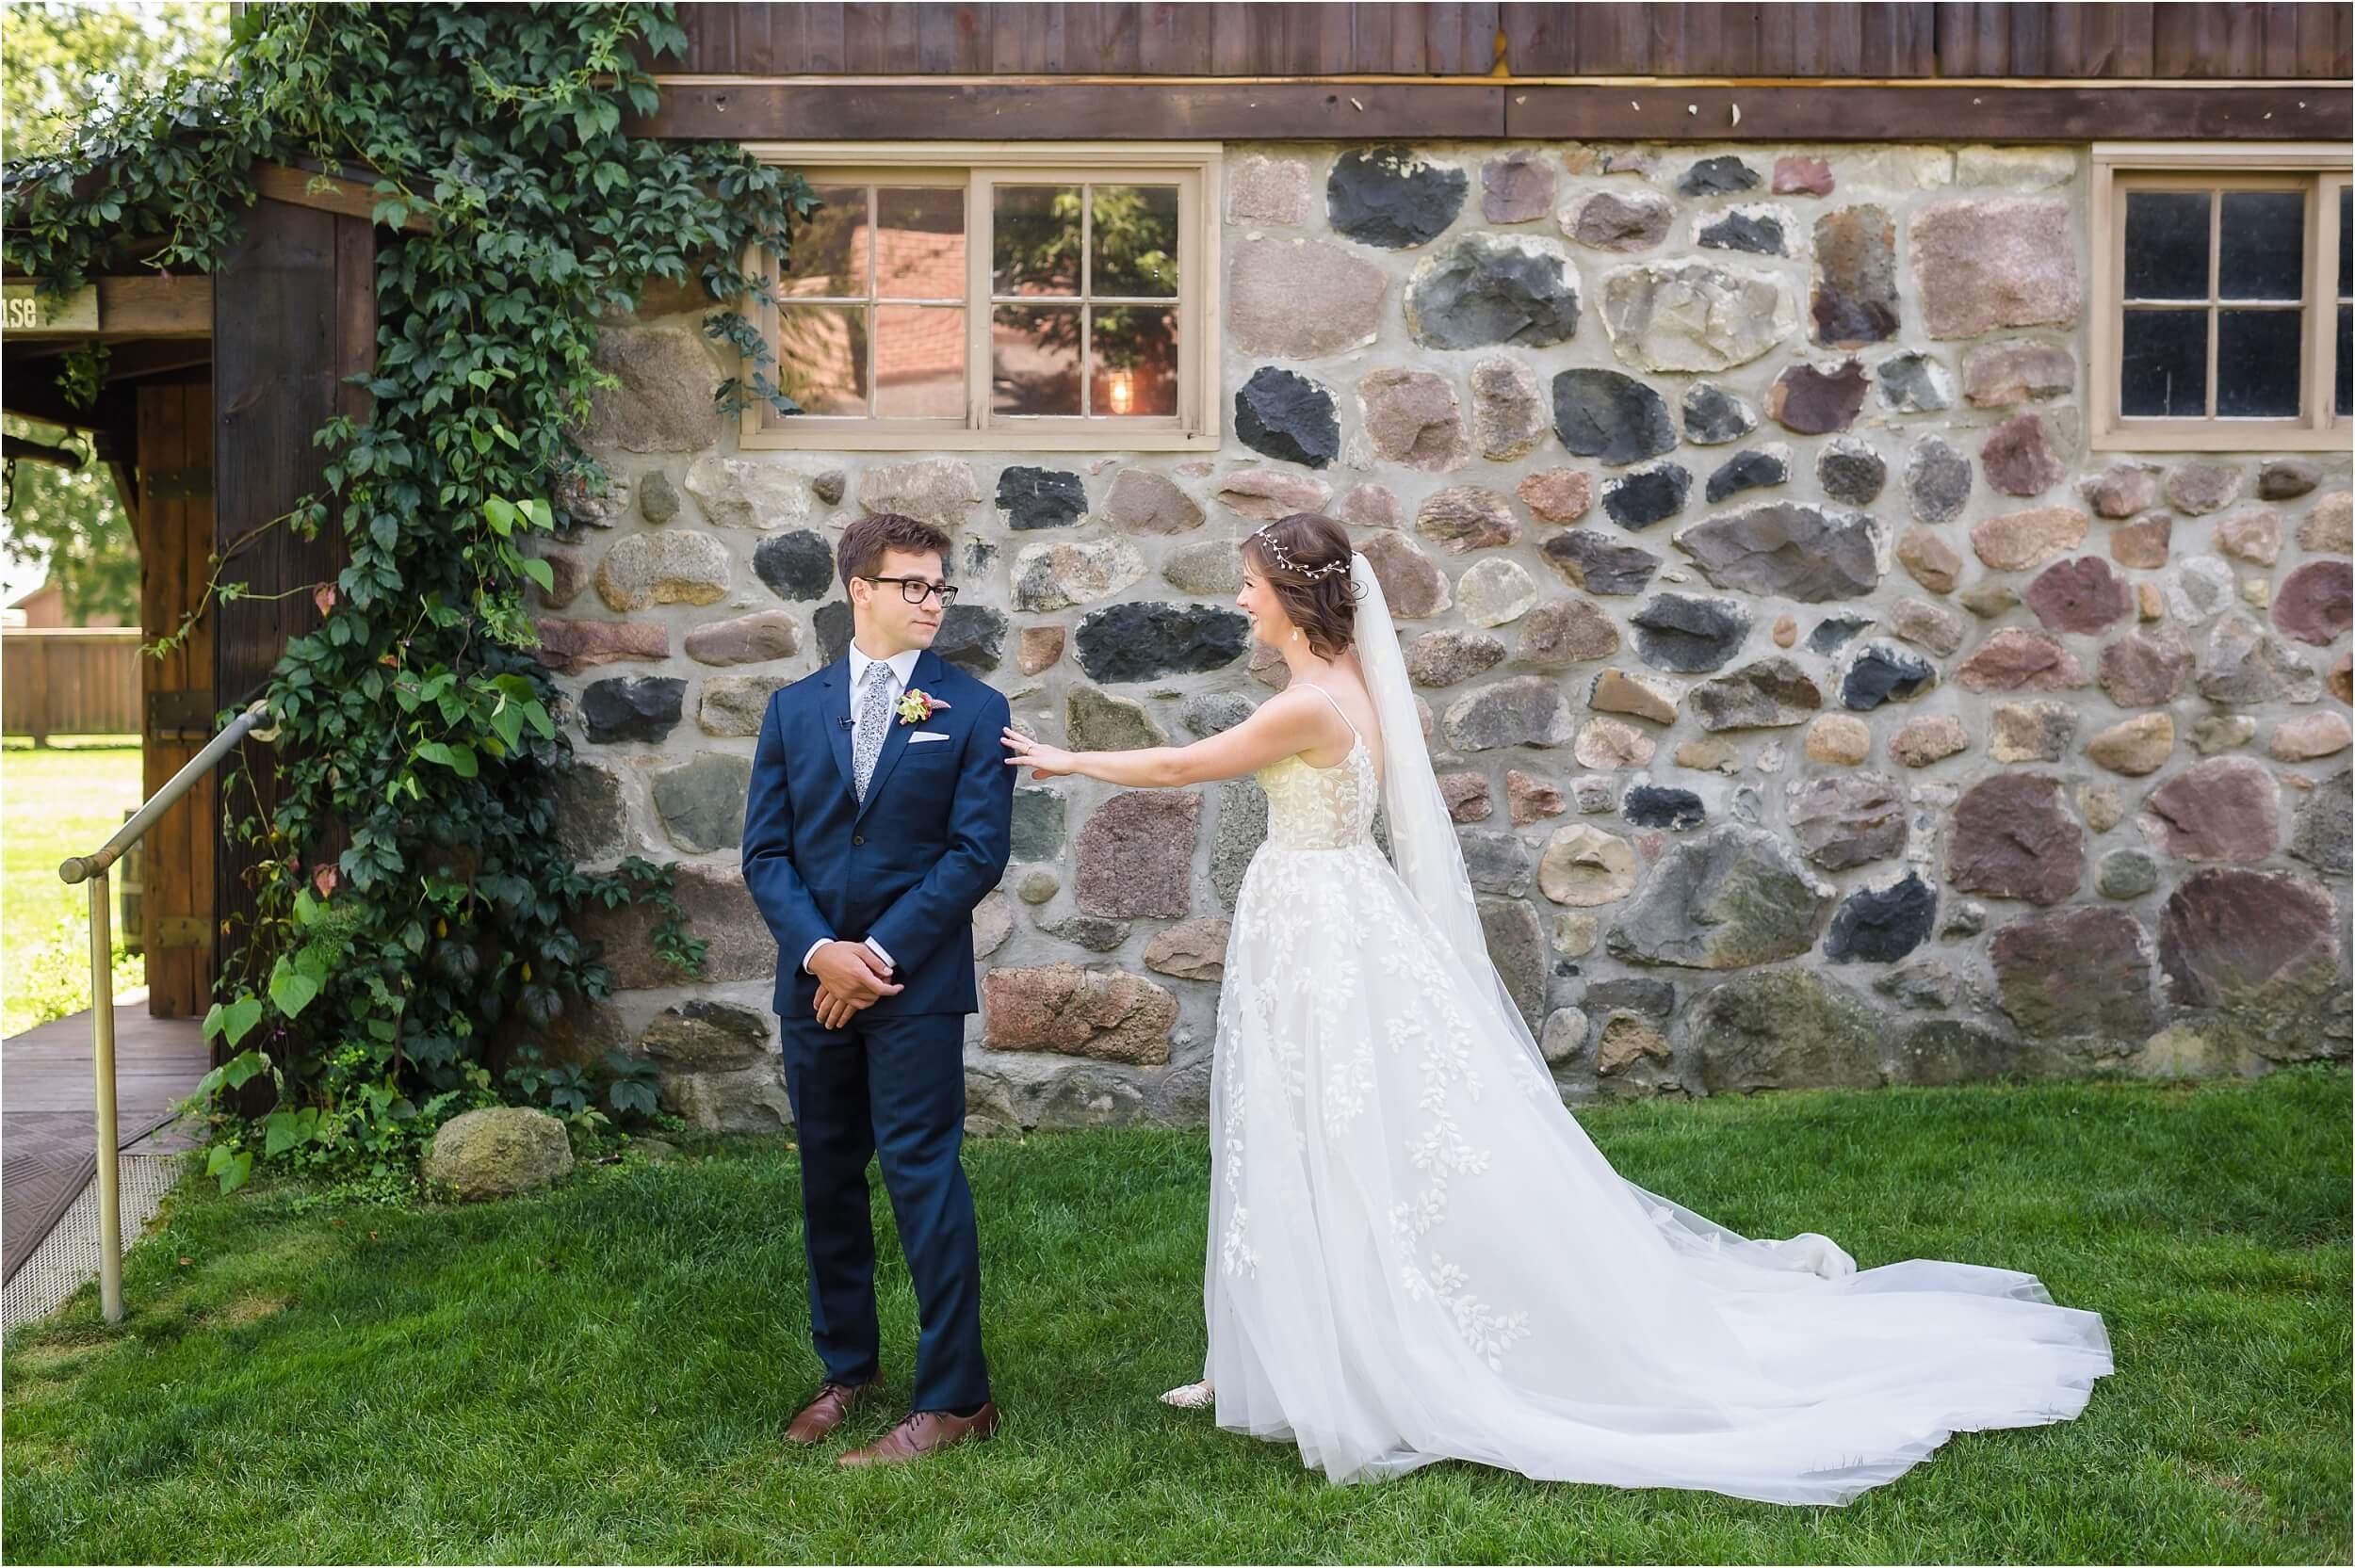  A bride sneaks up behind her husband before their wedding in front a historic barn venue in Michigan.  